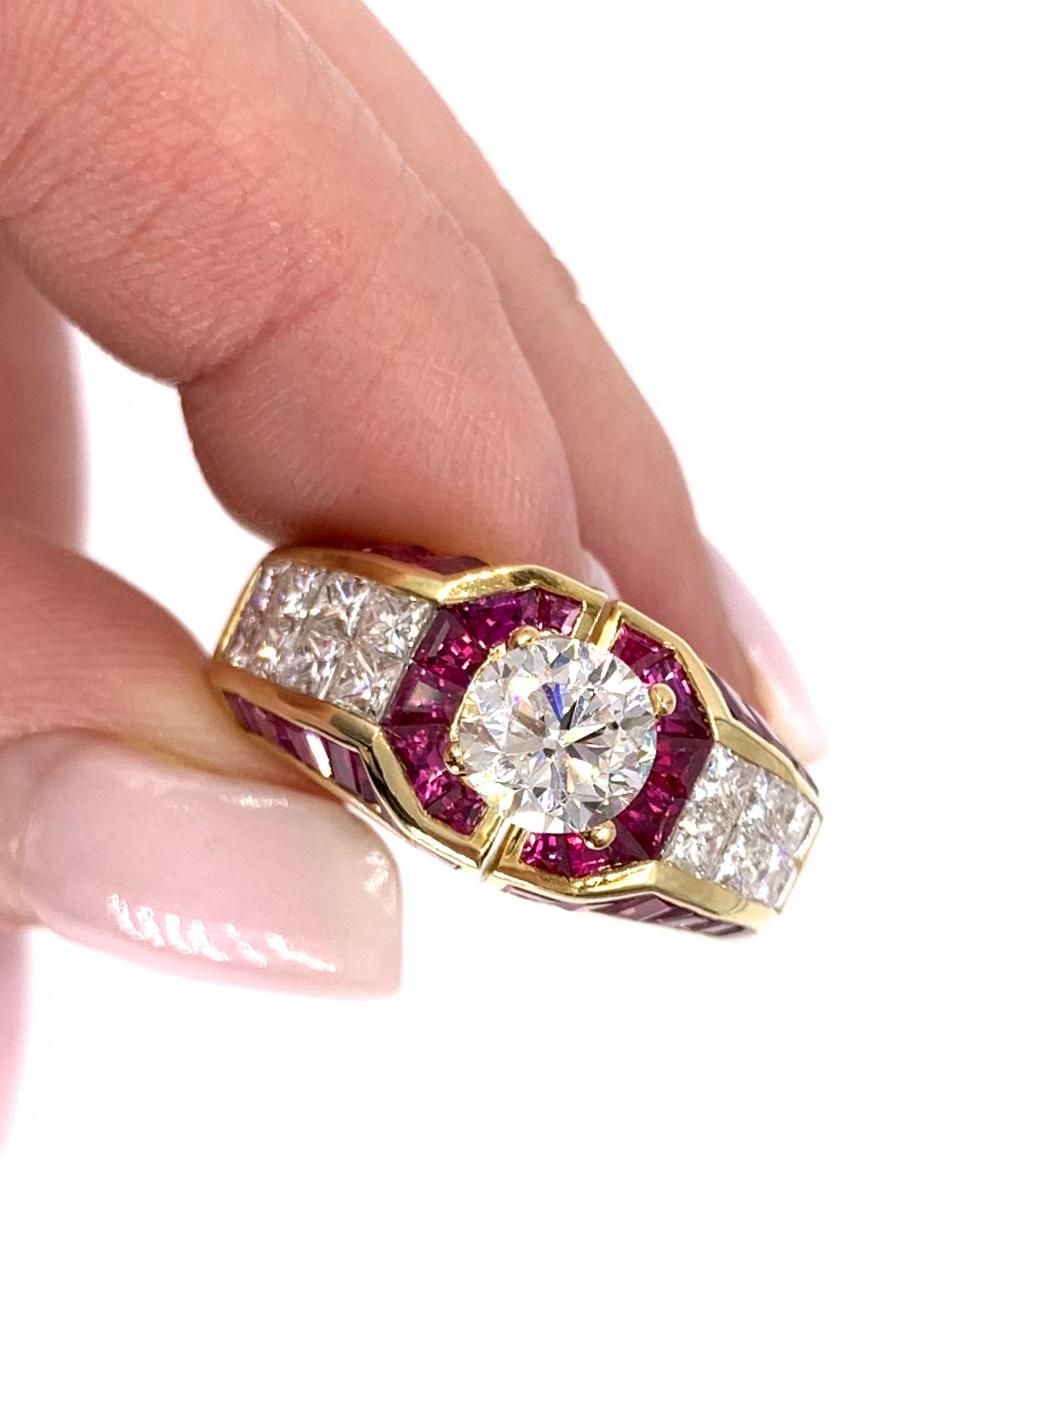 Made with superior quality by invisibly set fine jewelry designer, Quadrillion diamond company. This stunning 18 karat yellow gold mounting features 3.67 carats of high quality, well saturated genuine rubies and 1.06 carats of brilliant princess cut